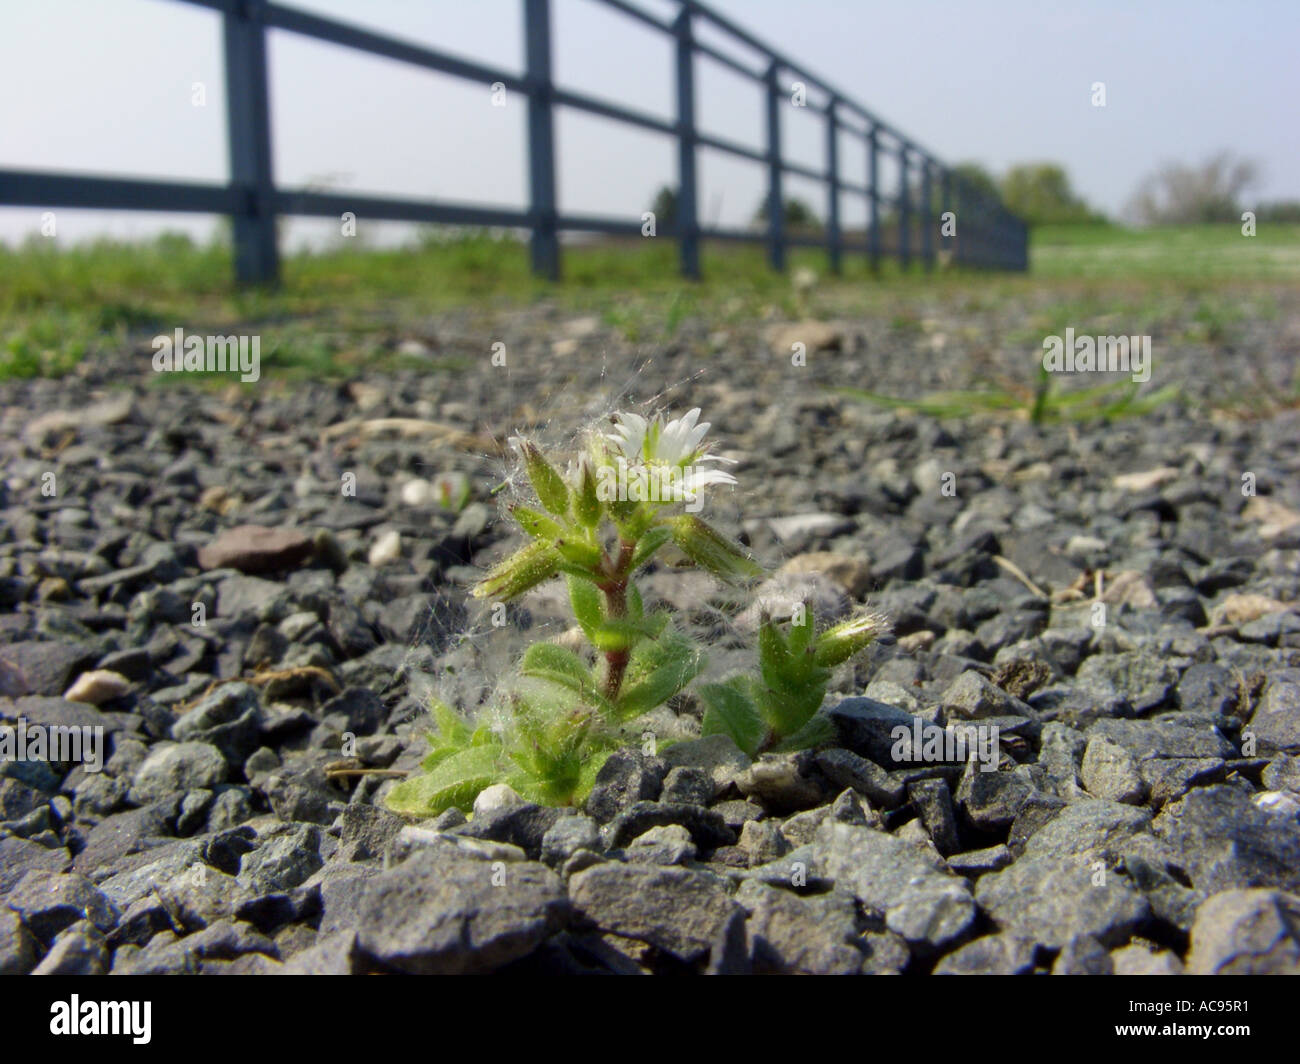 mouse-ear chickweed, sticky mouse-ear (Cerastium glomeratum), plant on gravelly ground on industrial wasteland, Germany, North Stock Photo